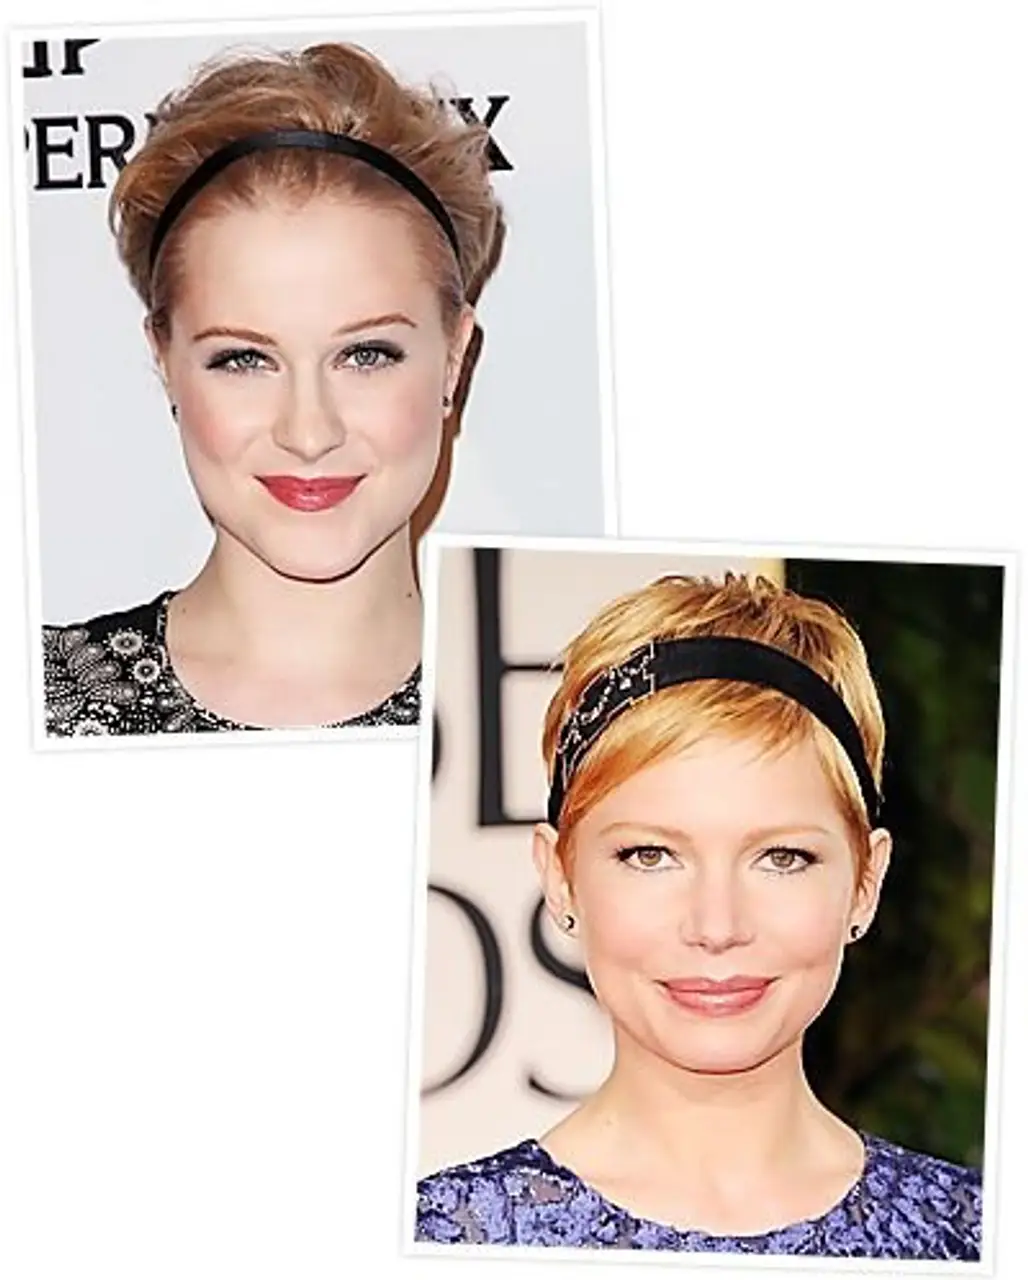 The Right Headband is an Easy Way to Make Short Hair Glamorous